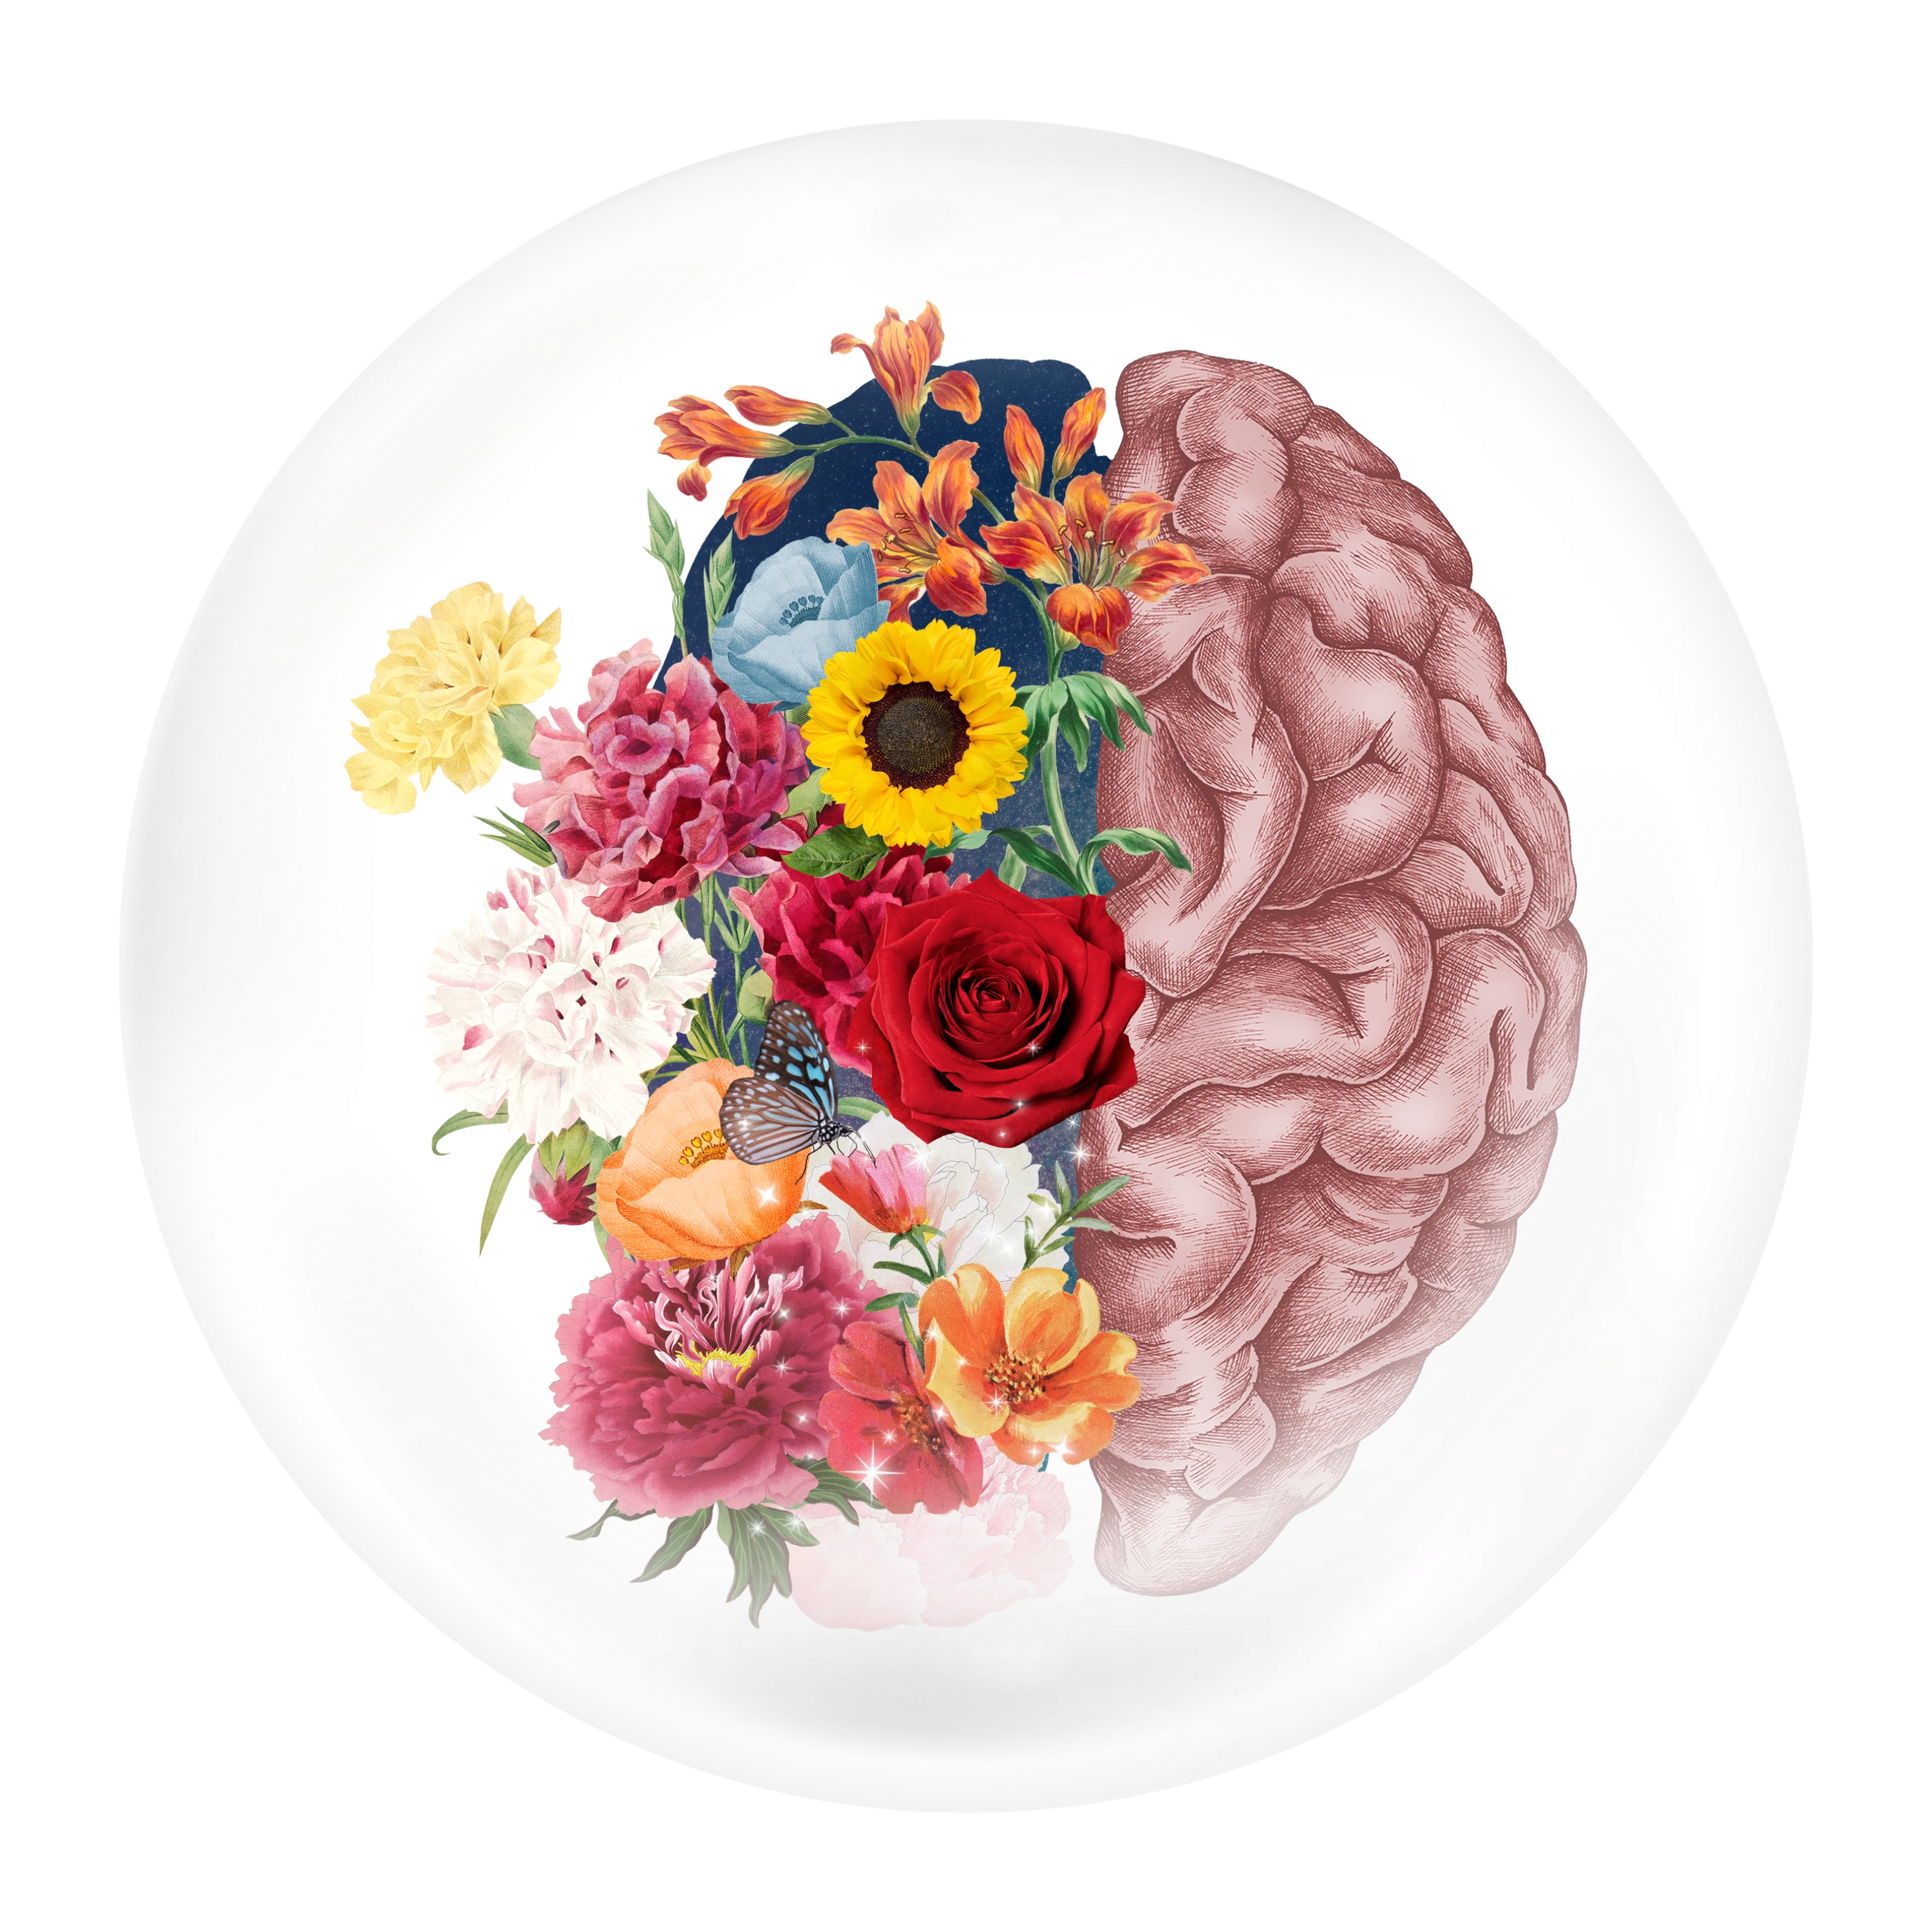 Education and Career Development-picture of blooming flowers in a growing brain